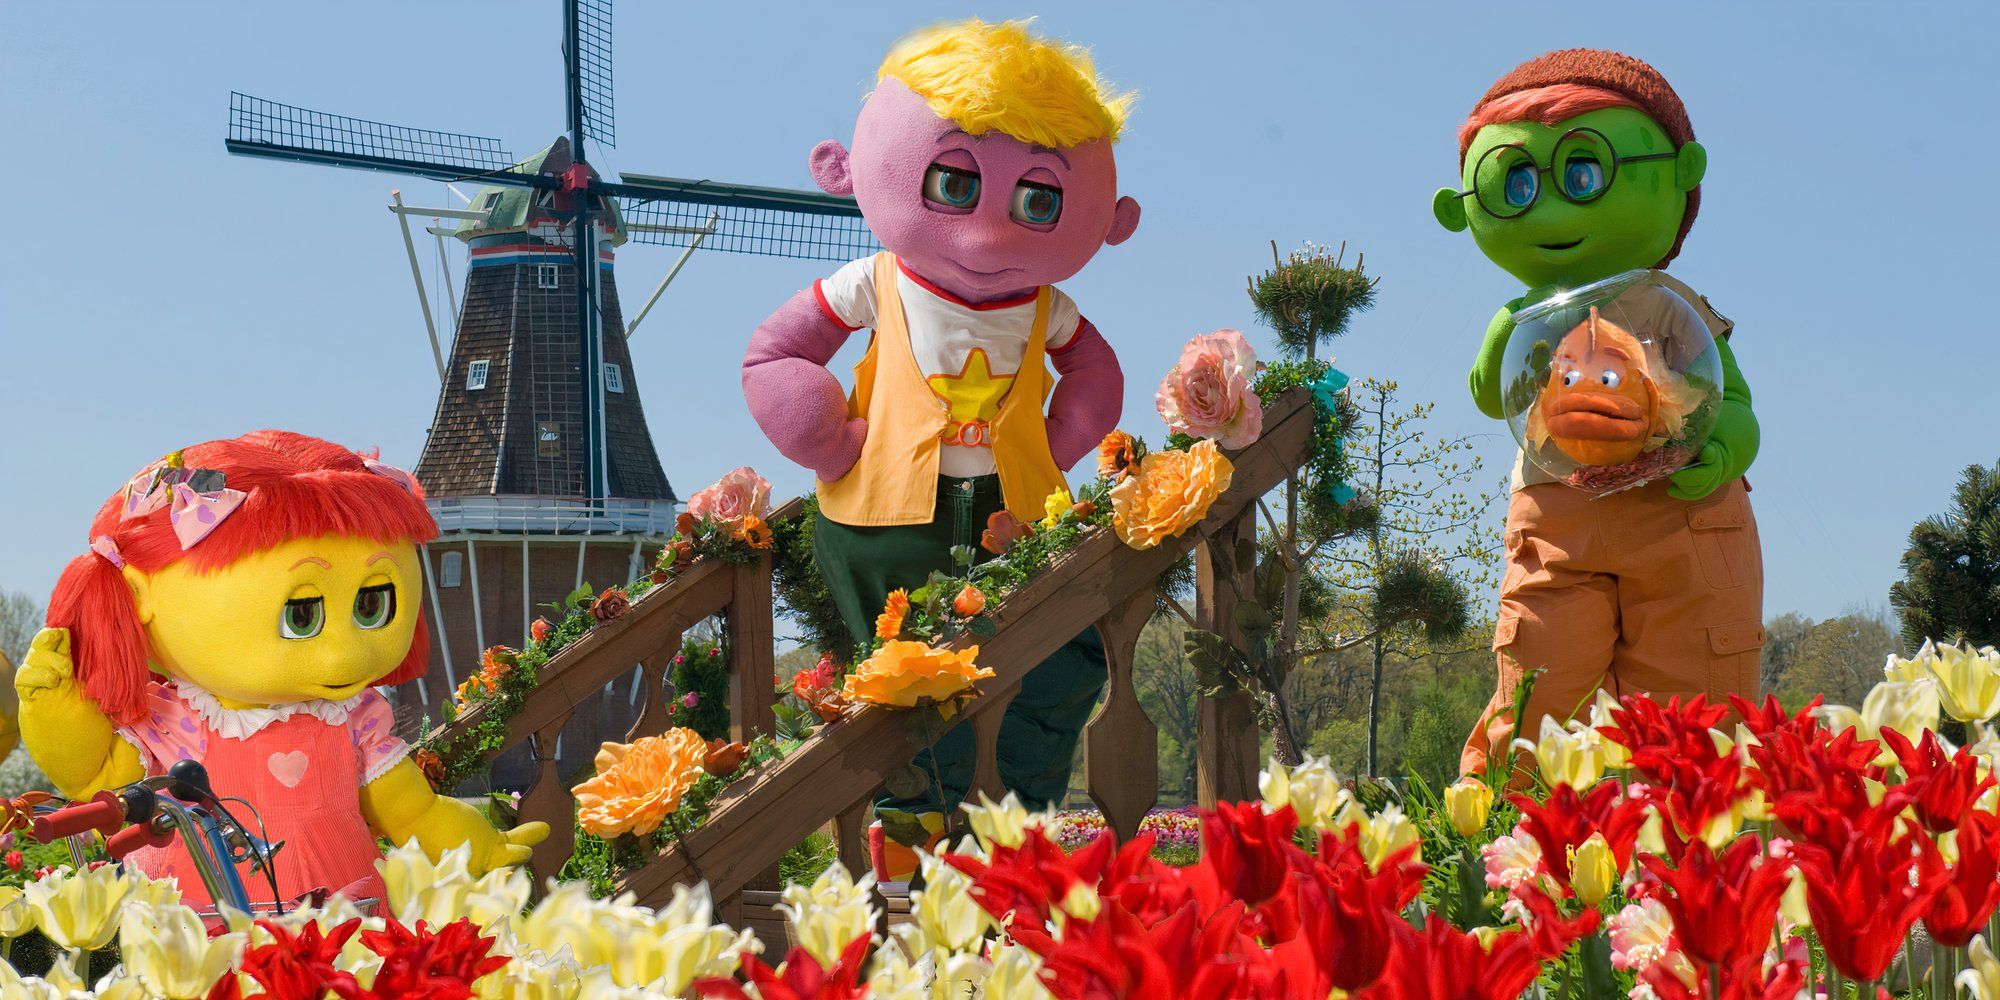 Toofie, Zoozie, Goobie, and Ruffy in a field of flowers in 'The Oogieloves in the Big Balloon Adventure'